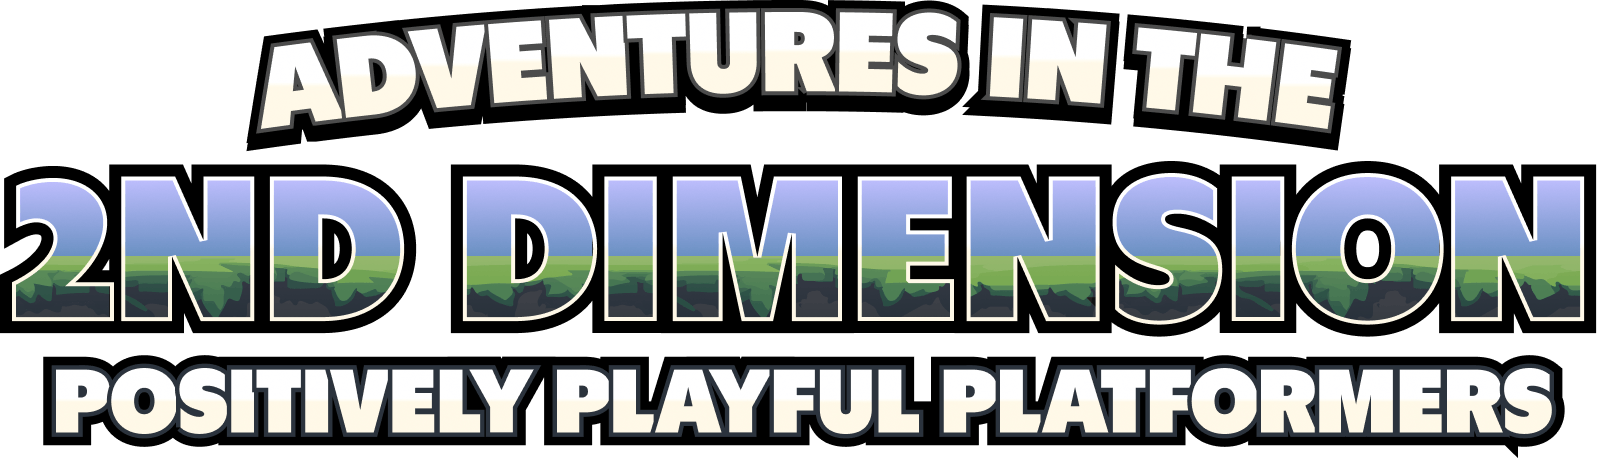 Adventures in the 2nd Dimension: Positively Playful Platformers